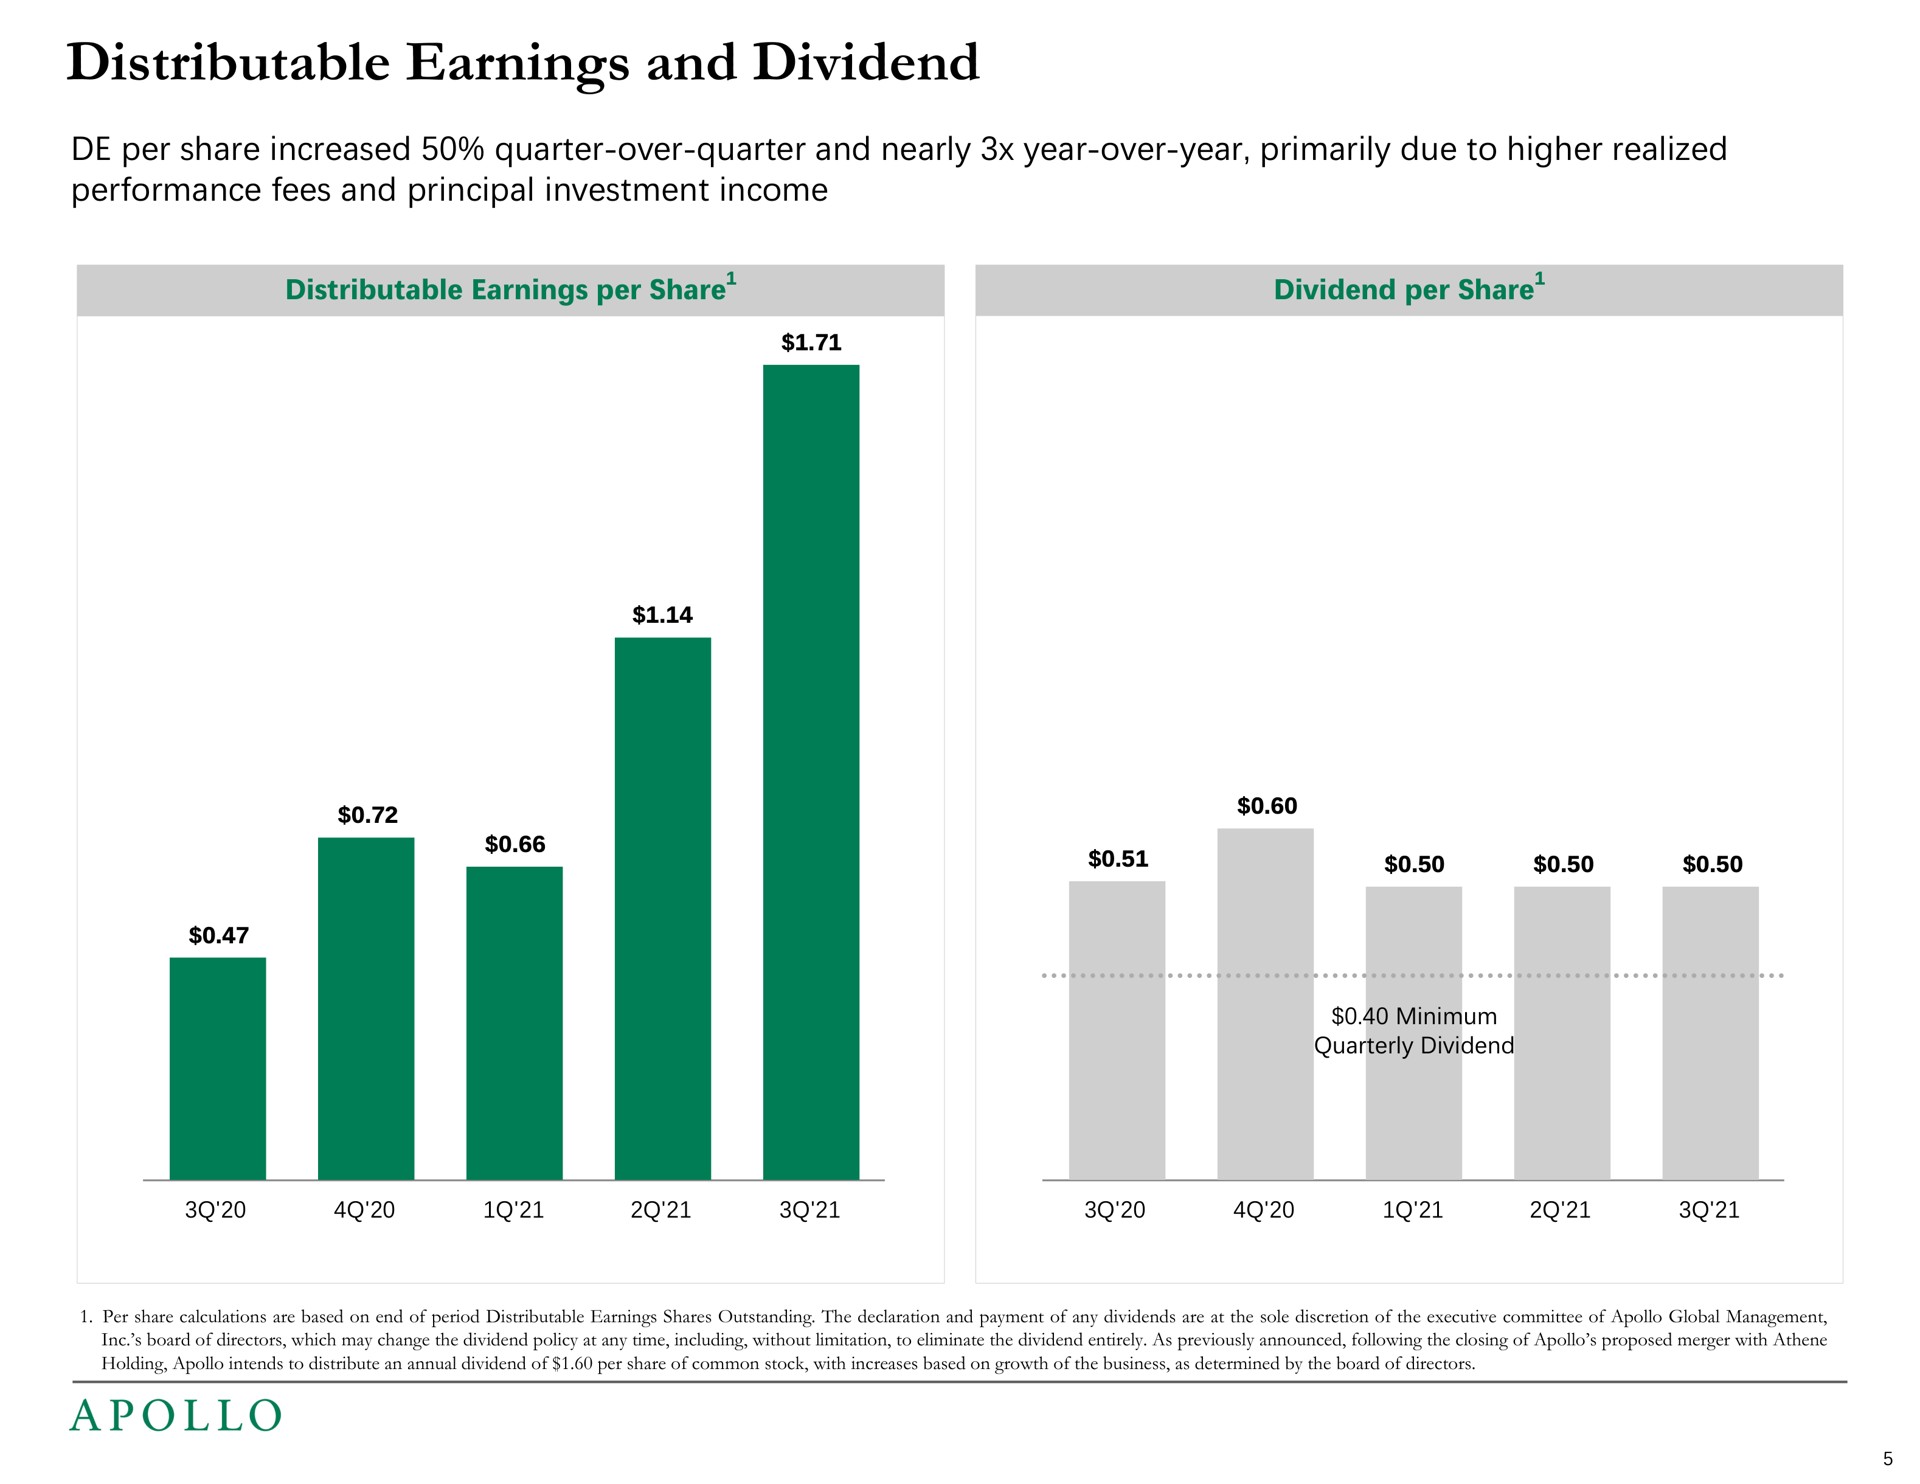 distributable earnings and dividend per share increased quarter over quarter and nearly year over year primarily due to higher realized performance fees and principal investment income | Apollo Global Management